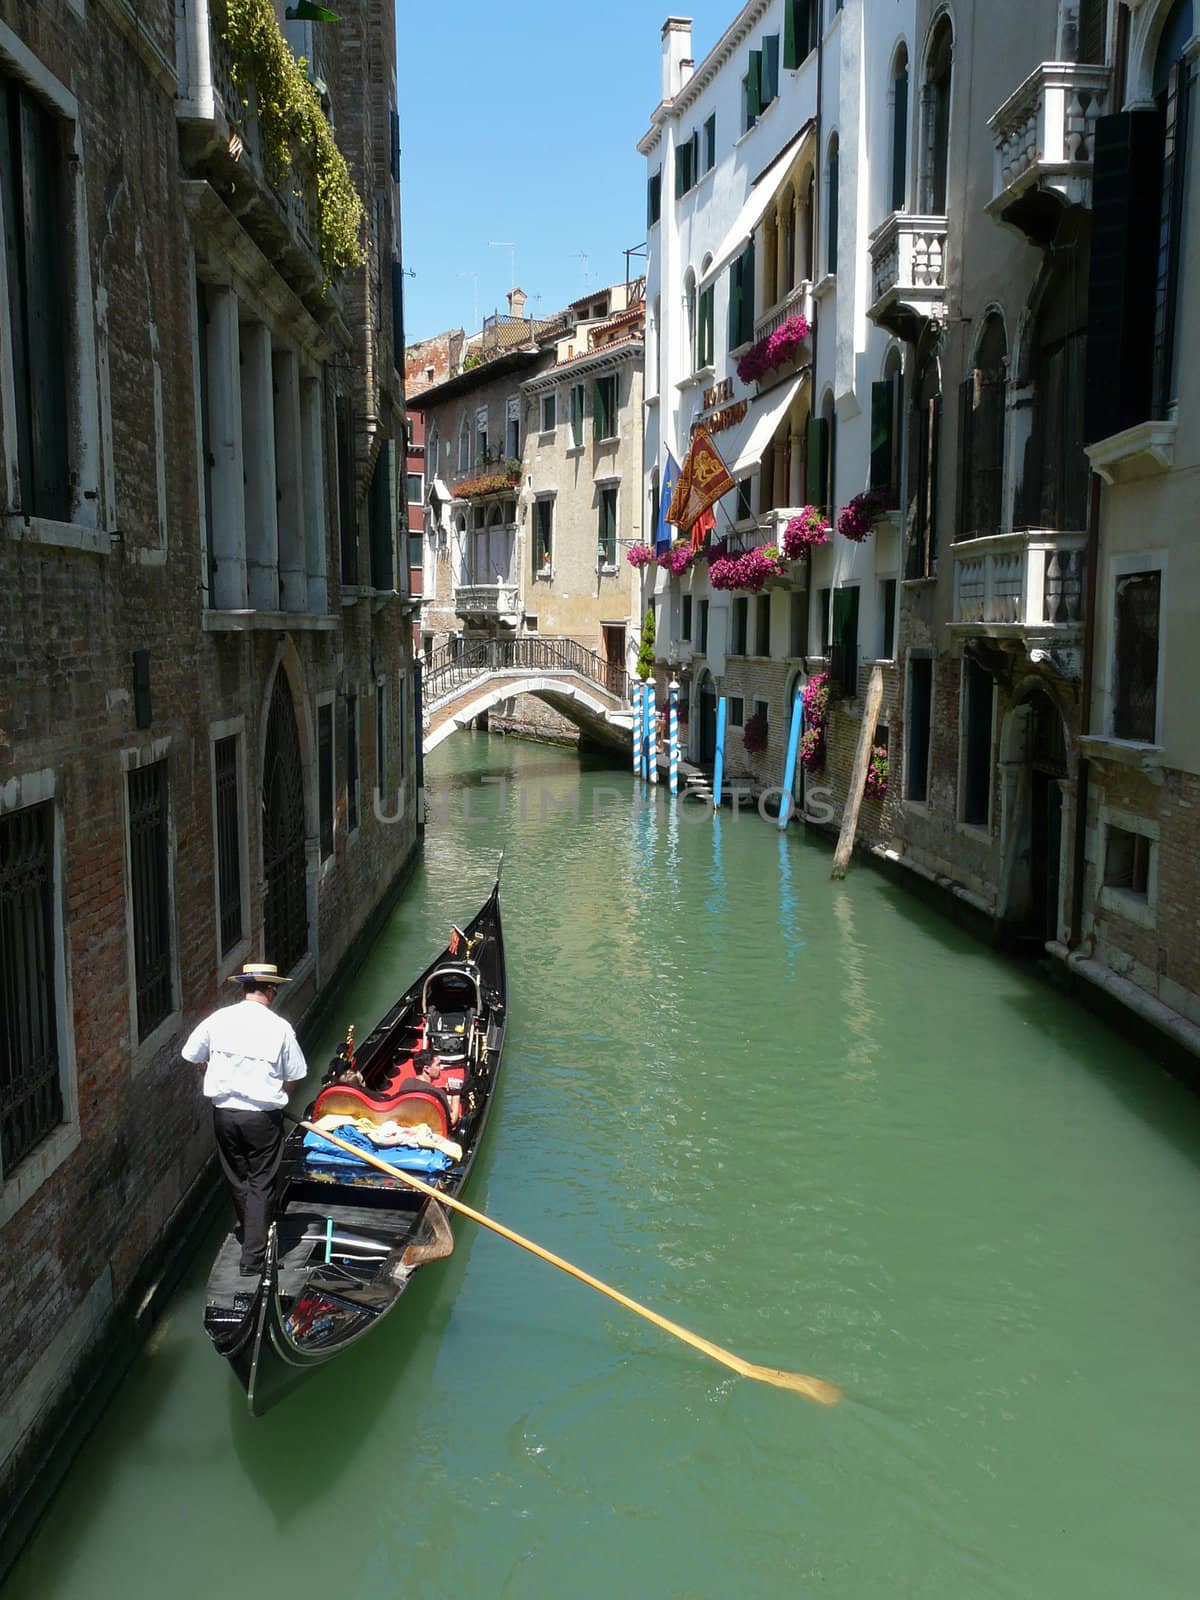 Gondolier paddling his gondola through a small channel in Venice, Italy.